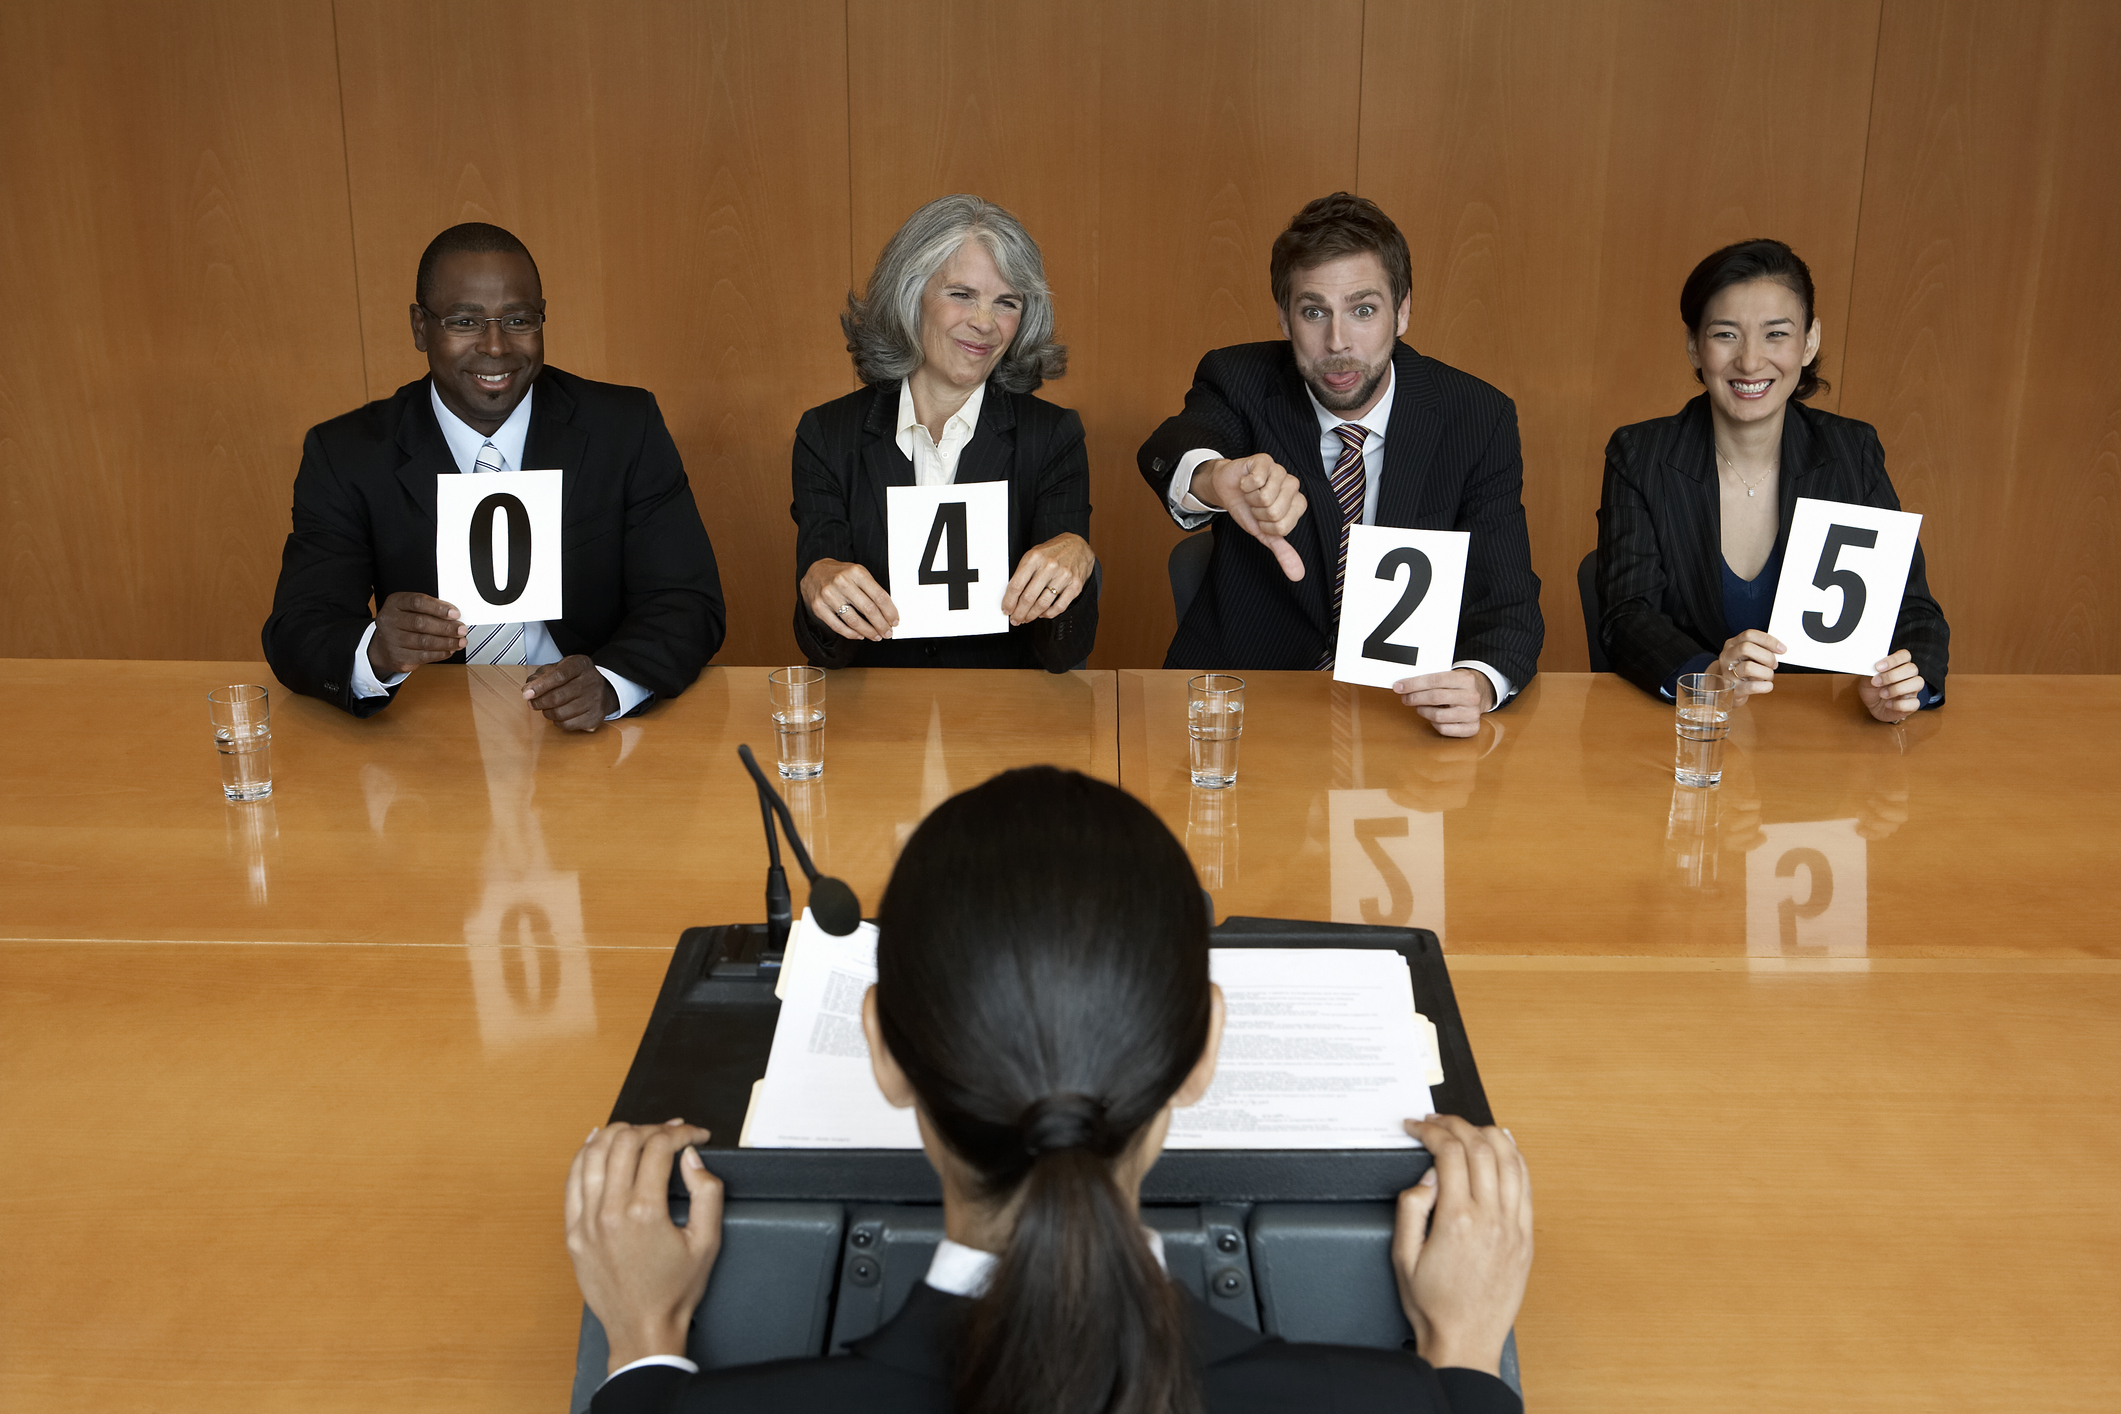 Businesswoman at interview, executives holding score cards, jeering